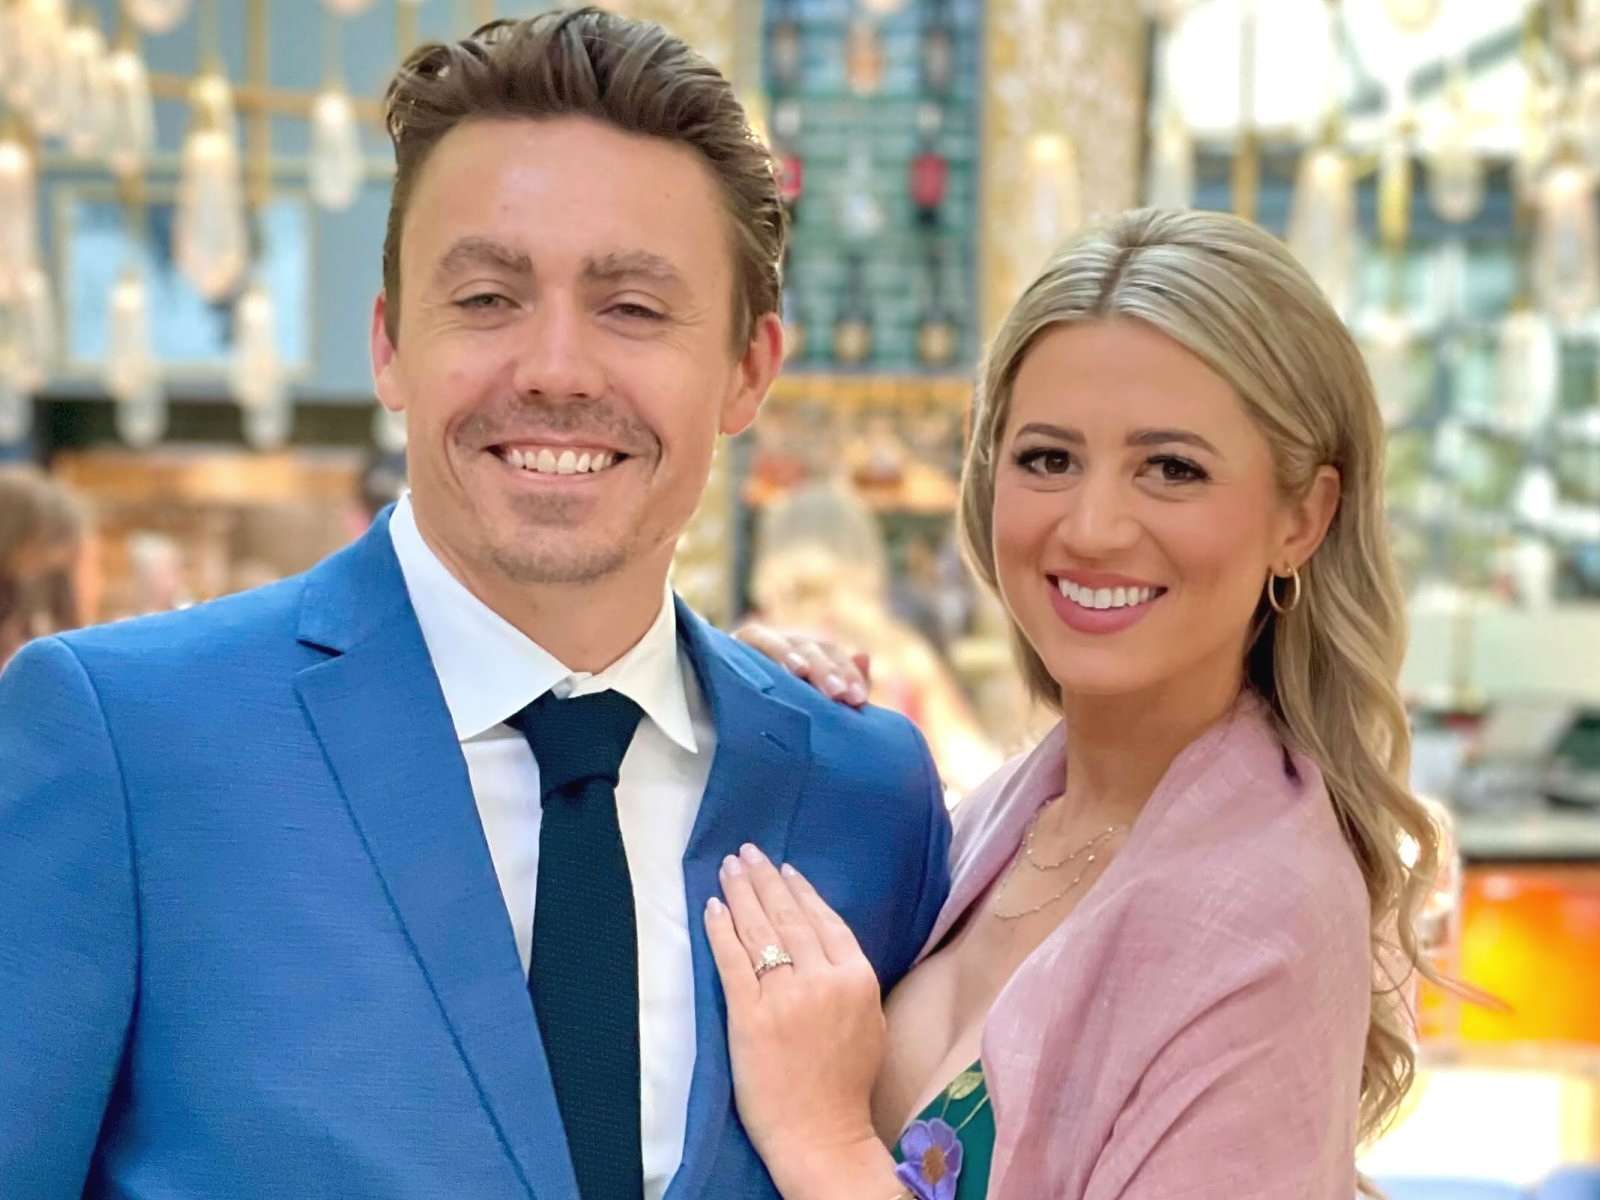 The Bachelor alum Lesley Murphy expecting second baby with husband Alex Kavanagh